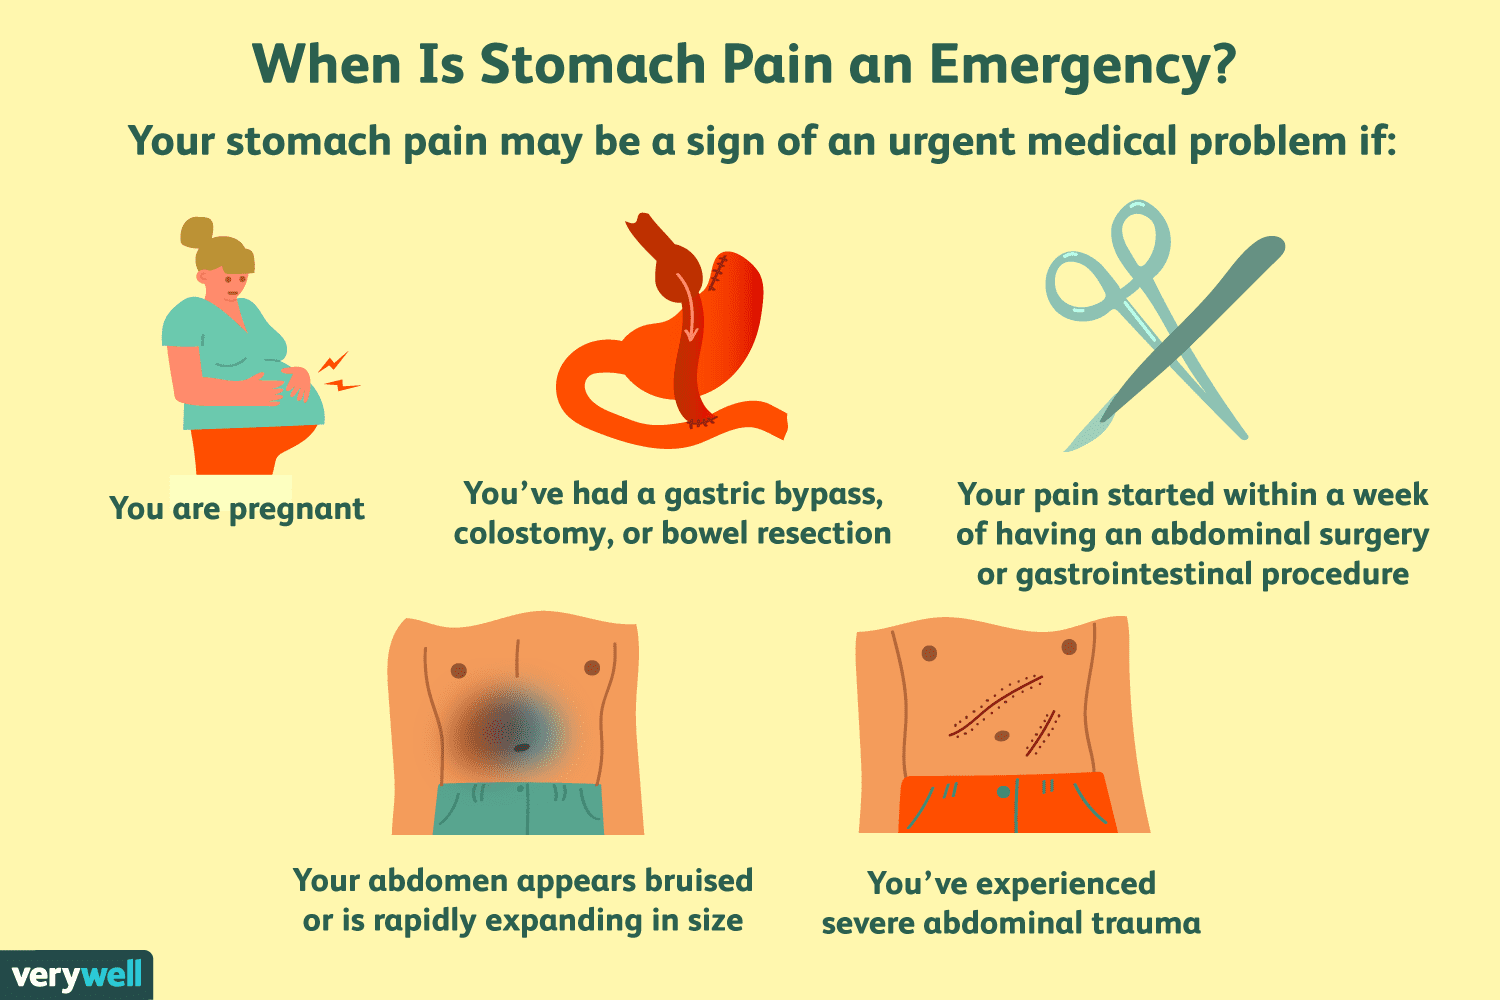 When Stomach Pain Is and Is Not an Emergency